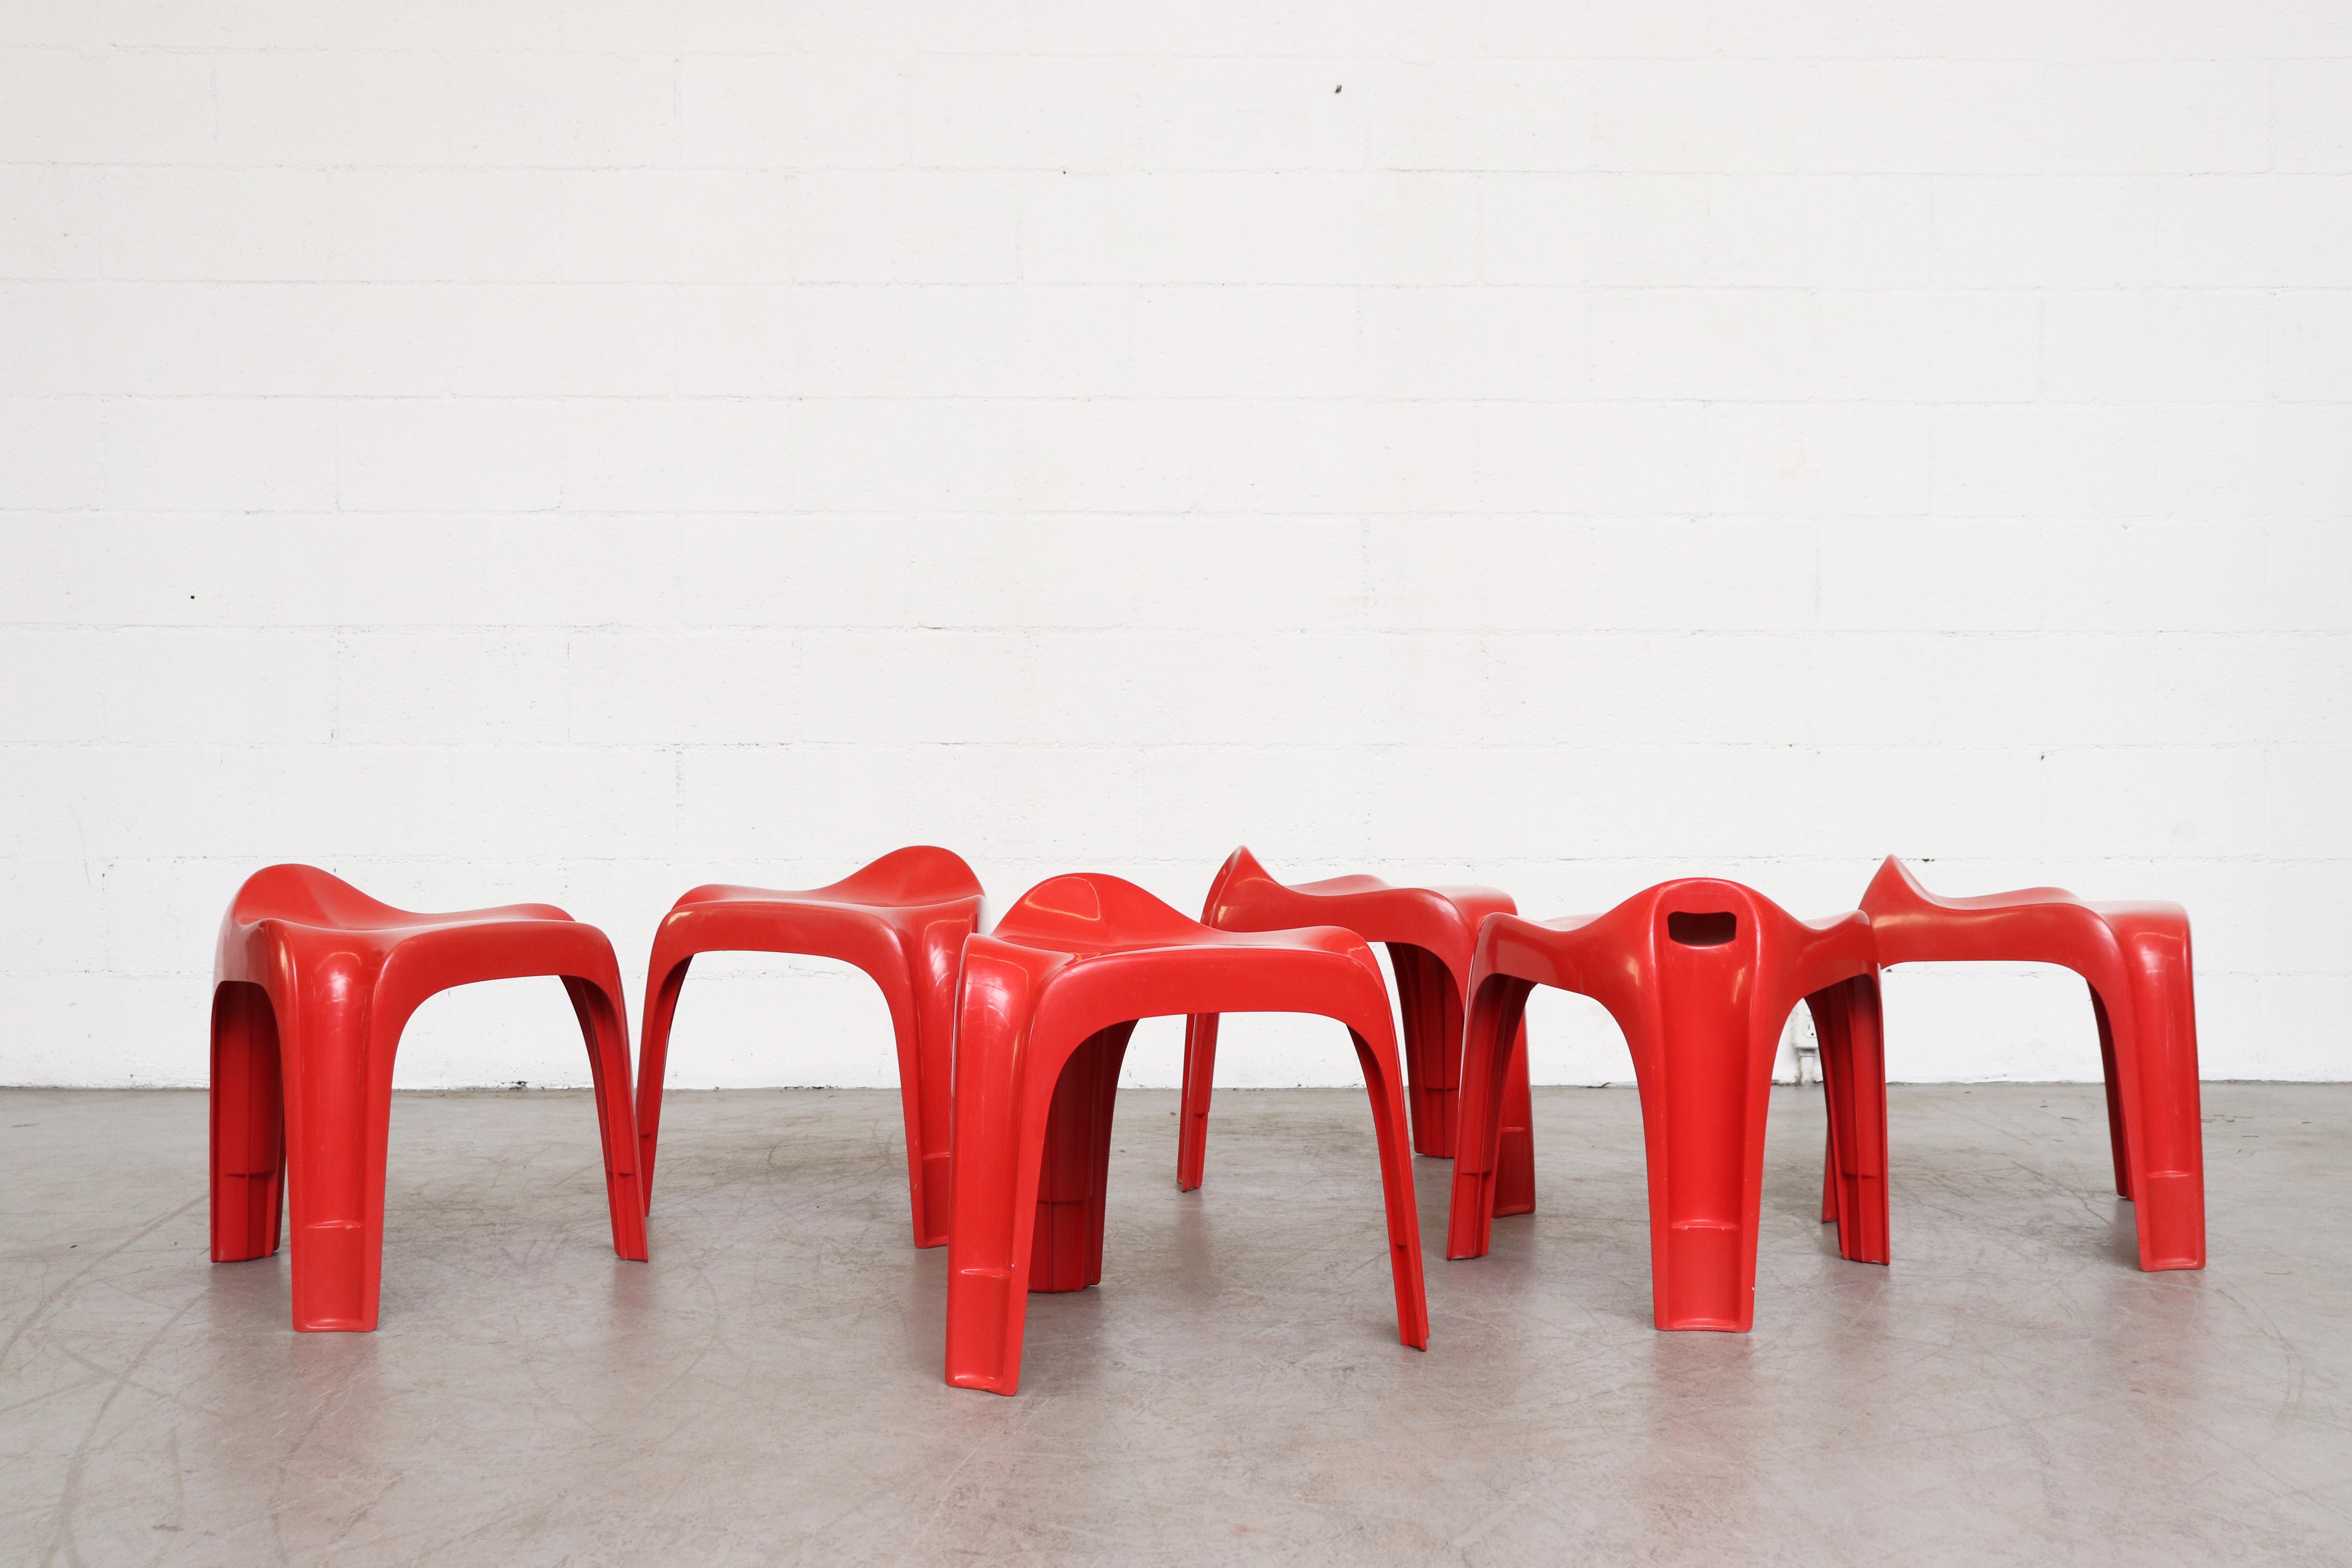 Set of 6 vintage Casalino molded red plastic stools by Alexeander Begge for Casala, circa 1970. In original condition with visible wear. Set price.